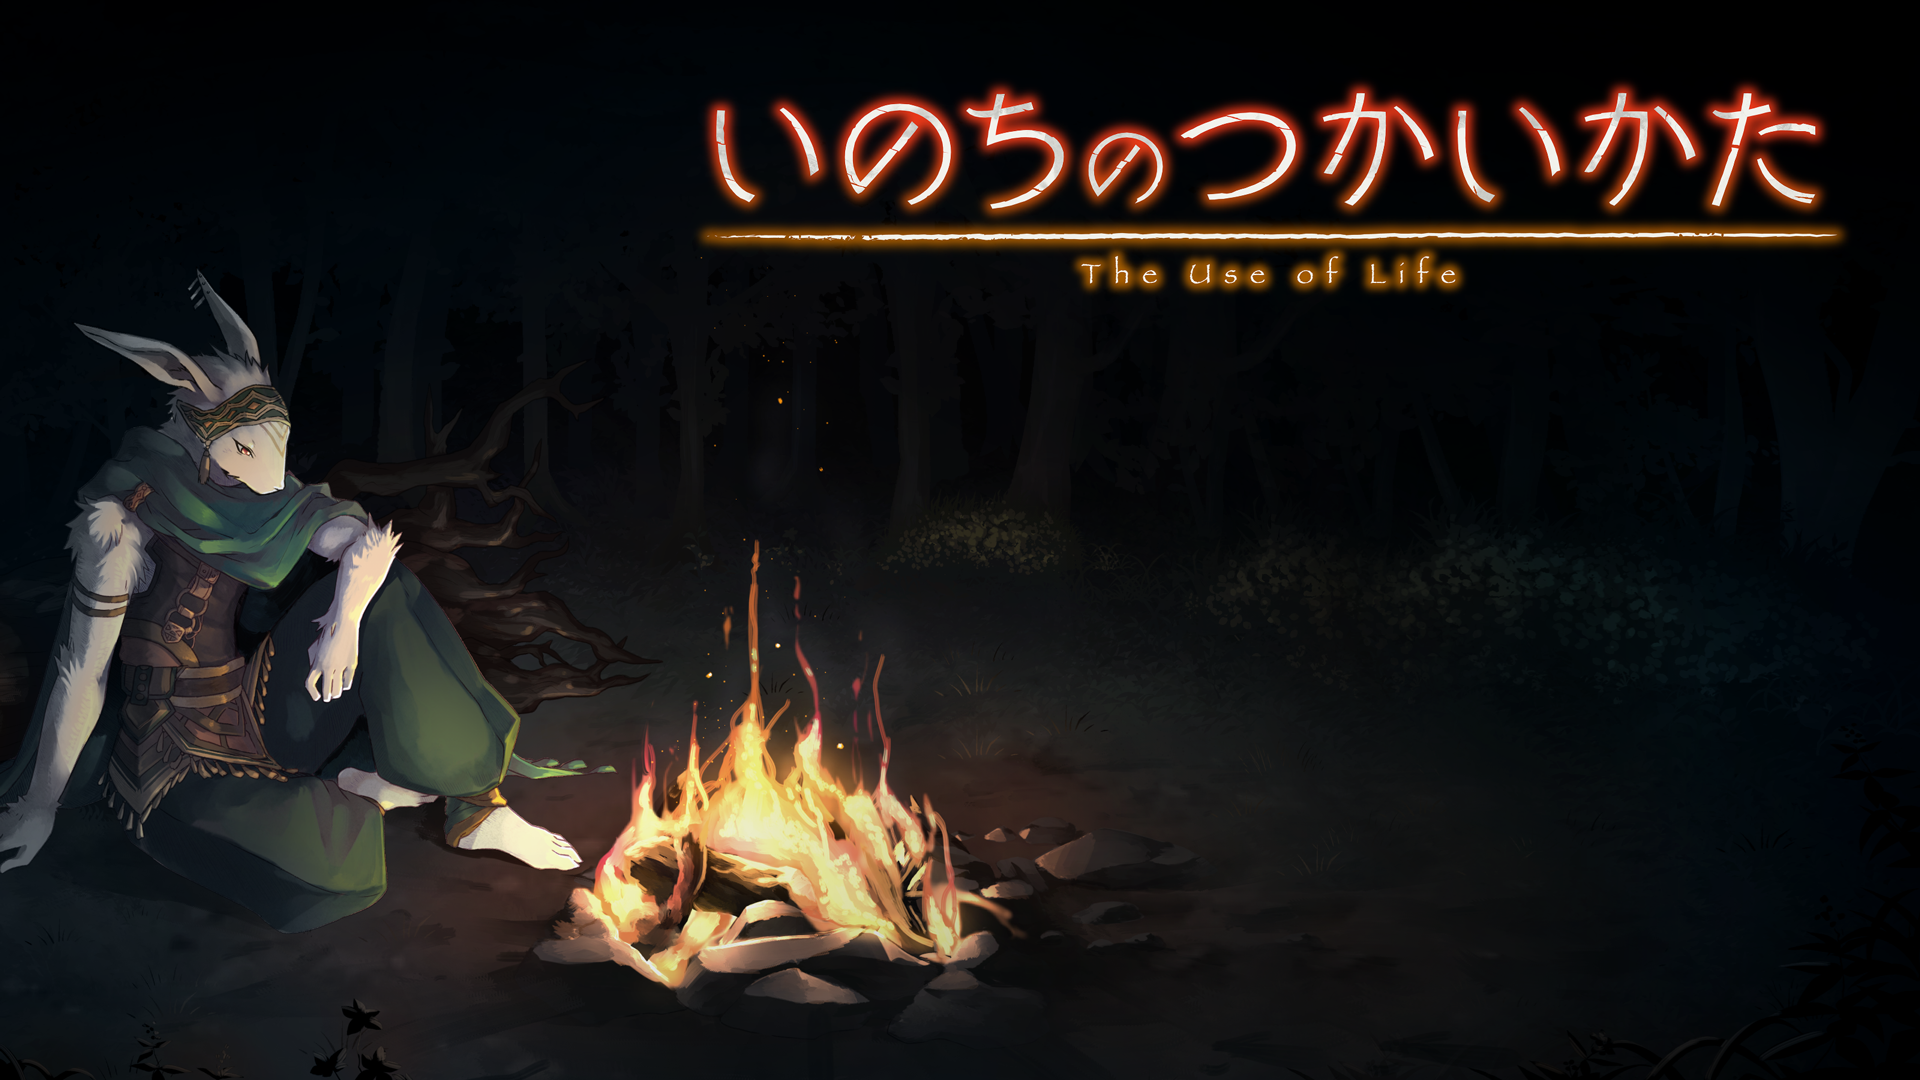 Choose Your Own Adventure in RPG The Use of Life - Early Access Release in Spring 2022